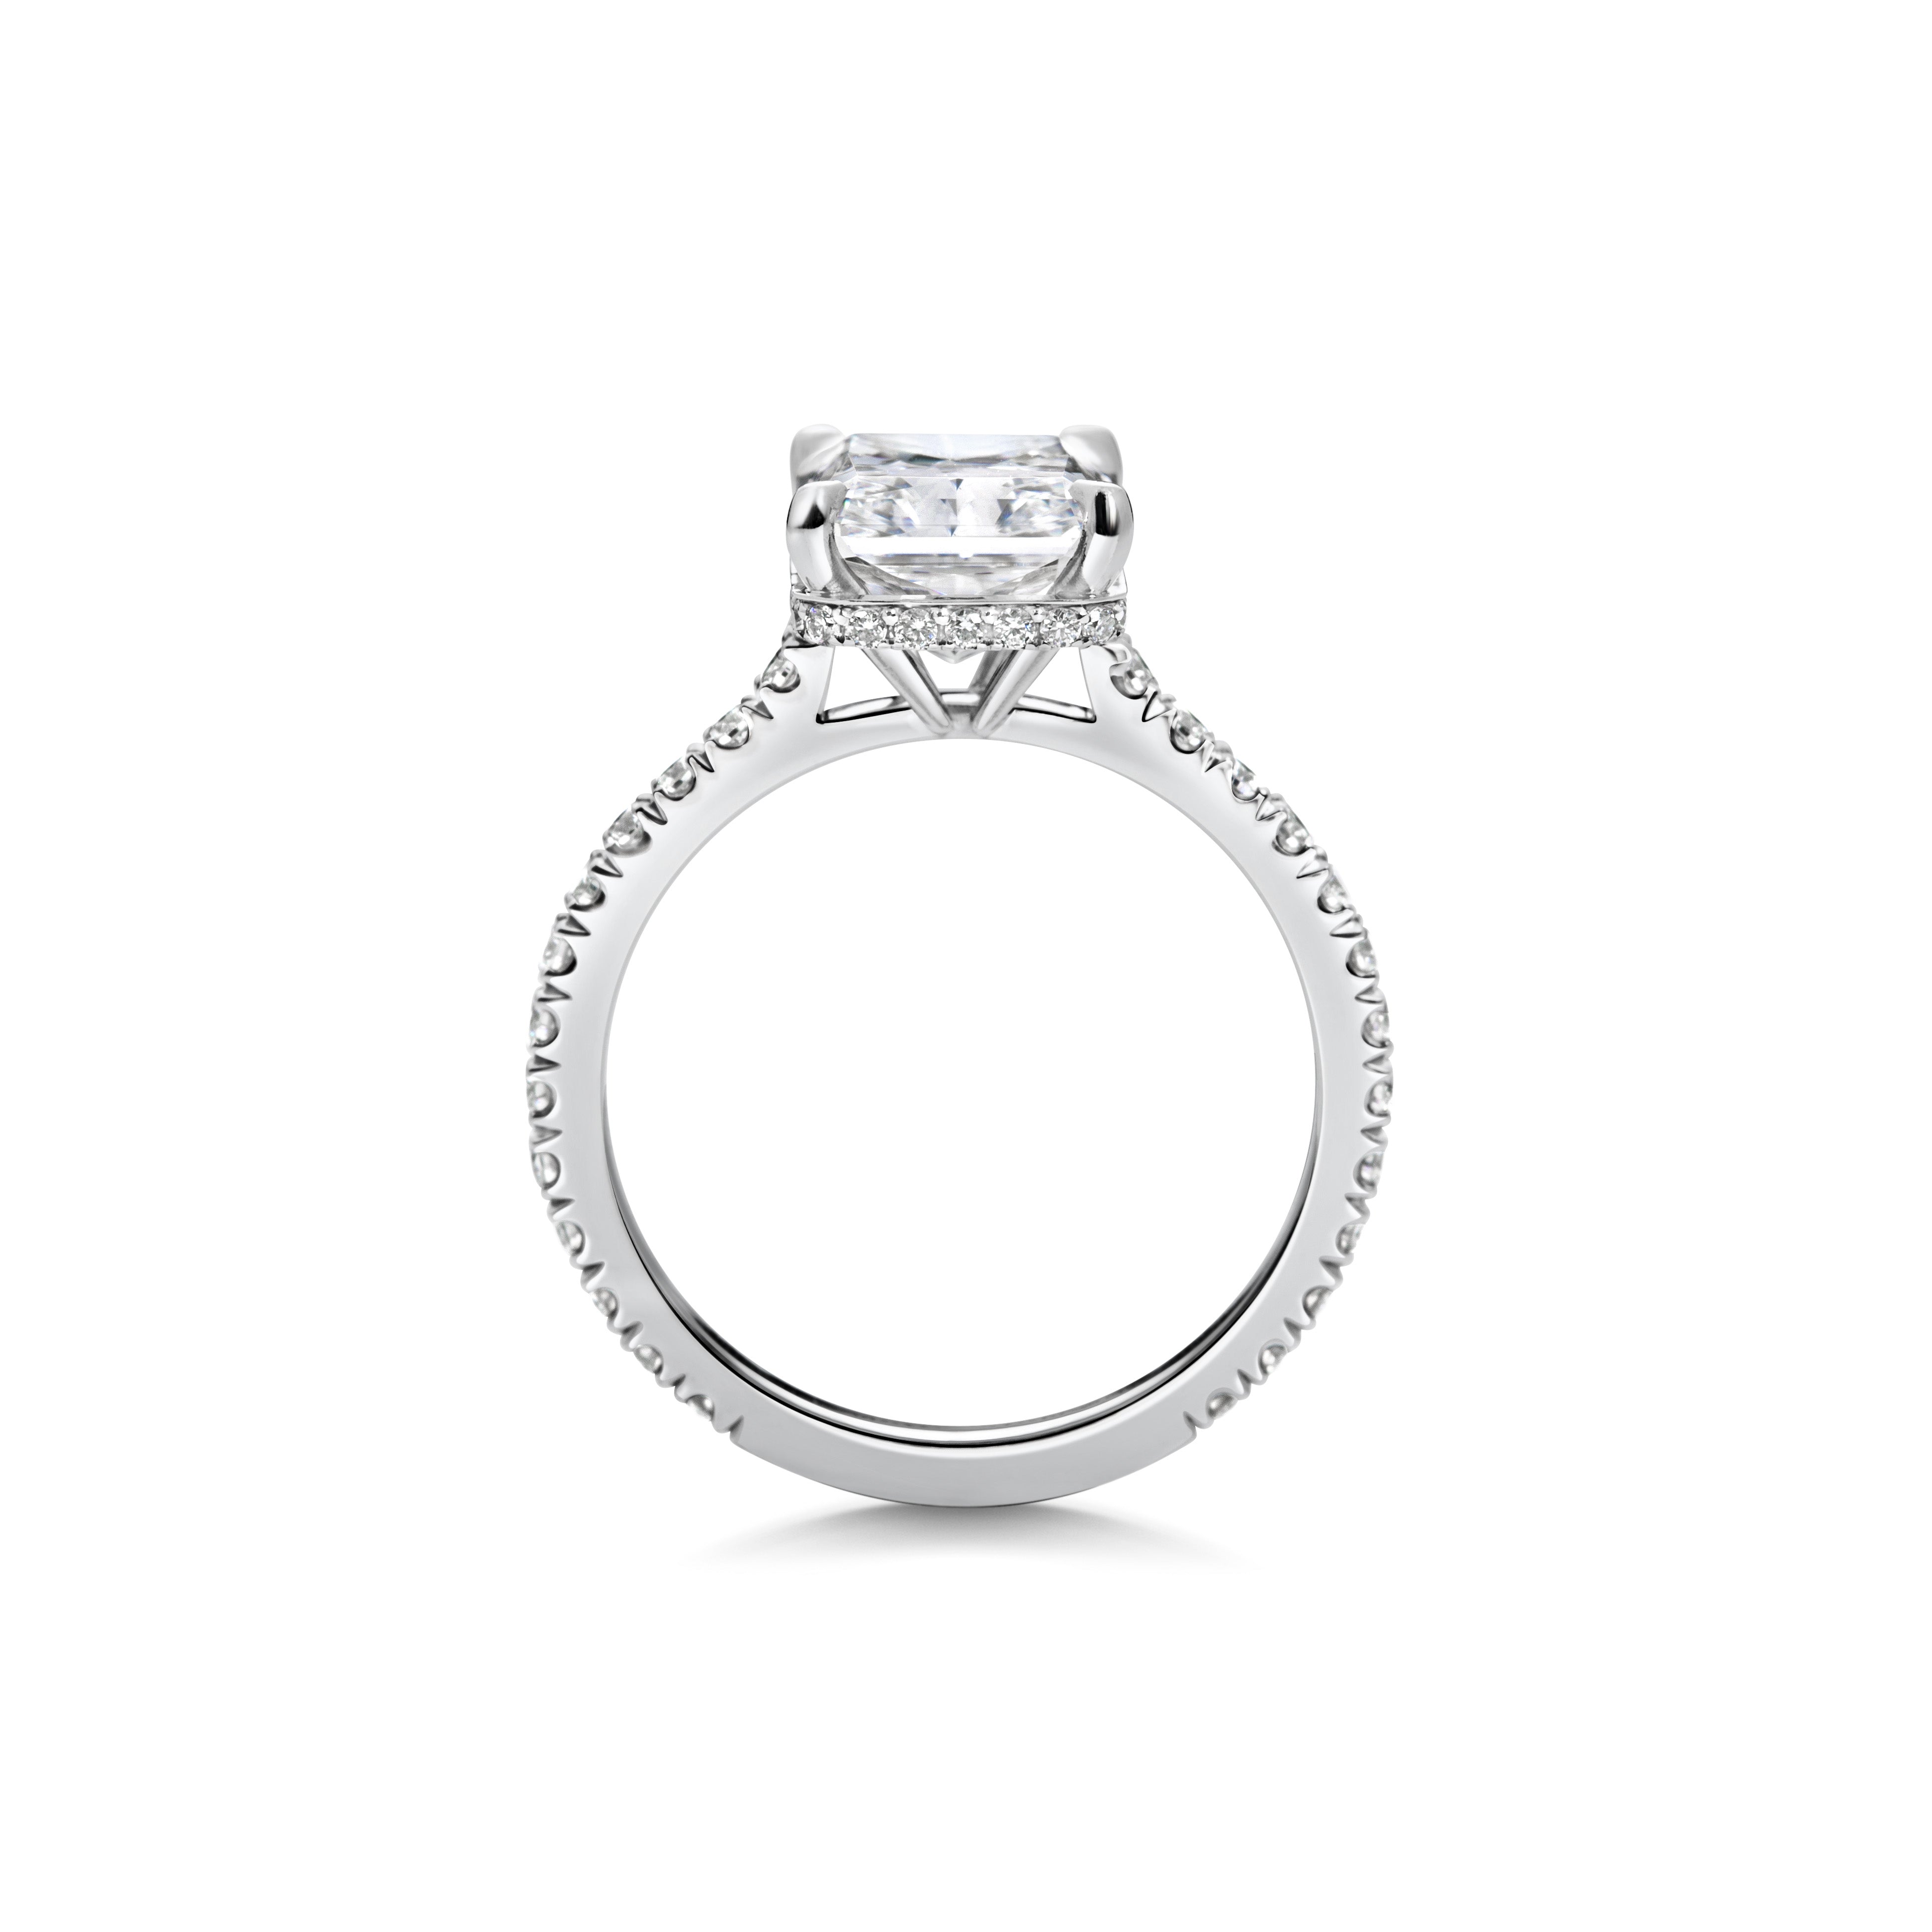 LOULOU radiant cut white gold